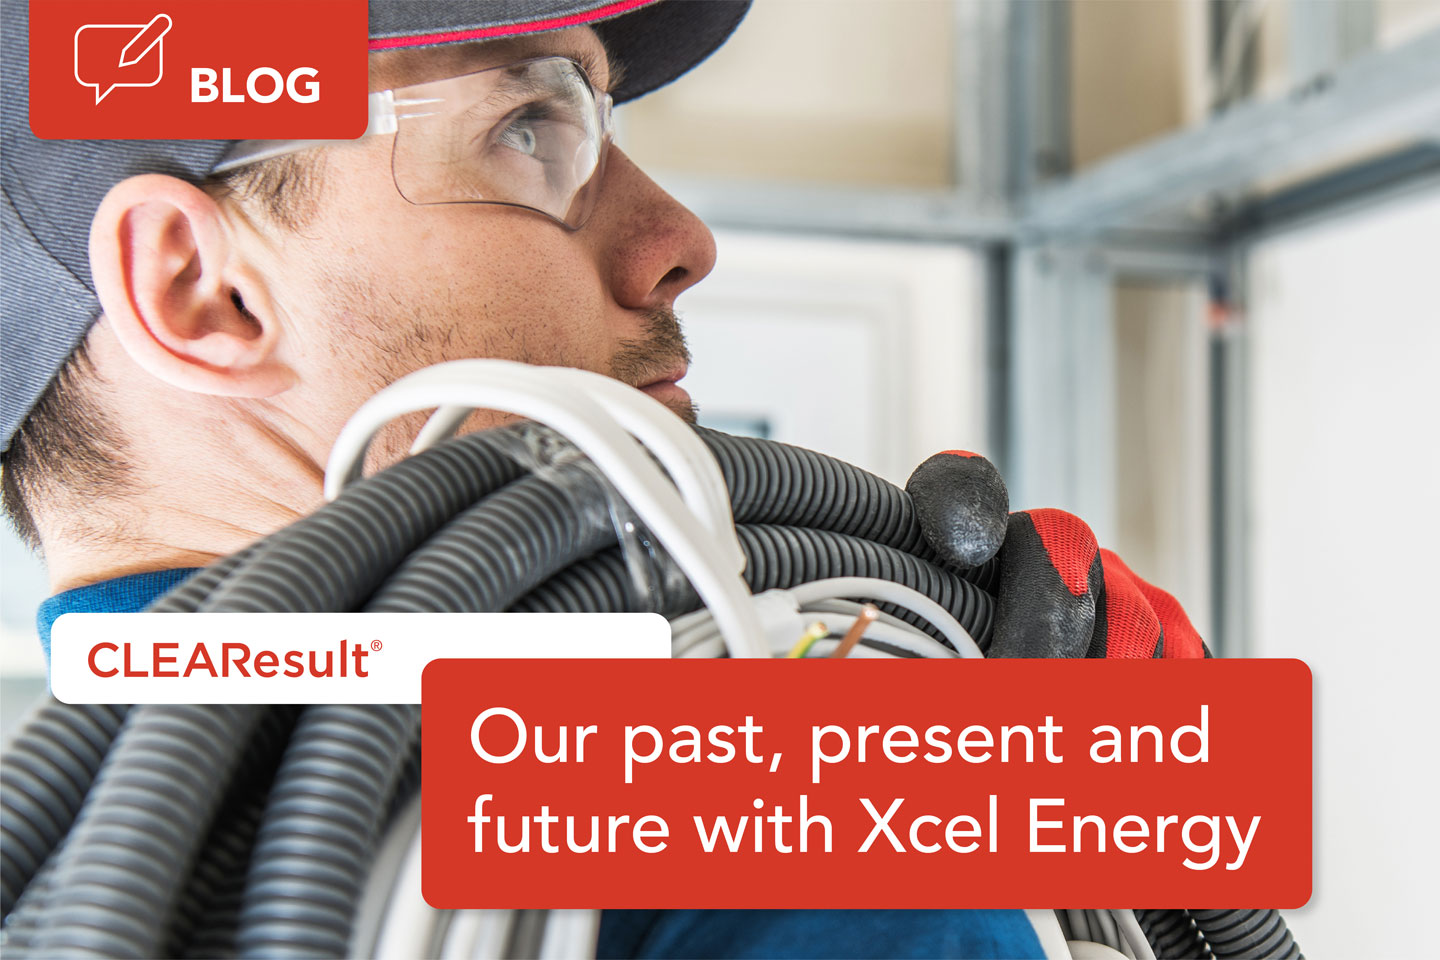 Our past, present and future with Xcel Energy